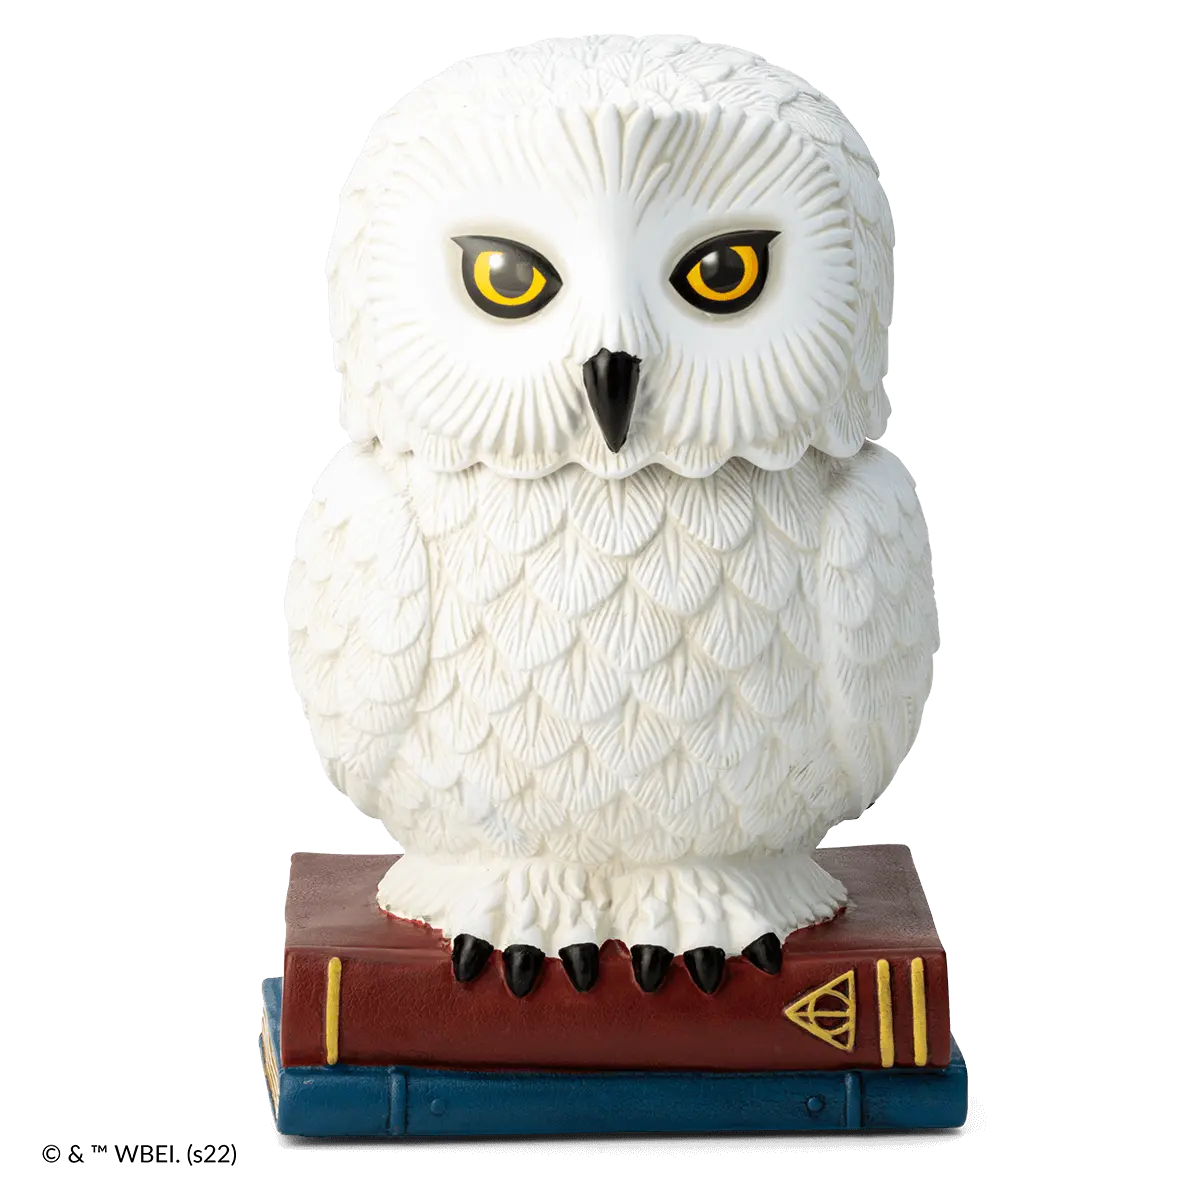 New in box harry potter scentsy warmer owl